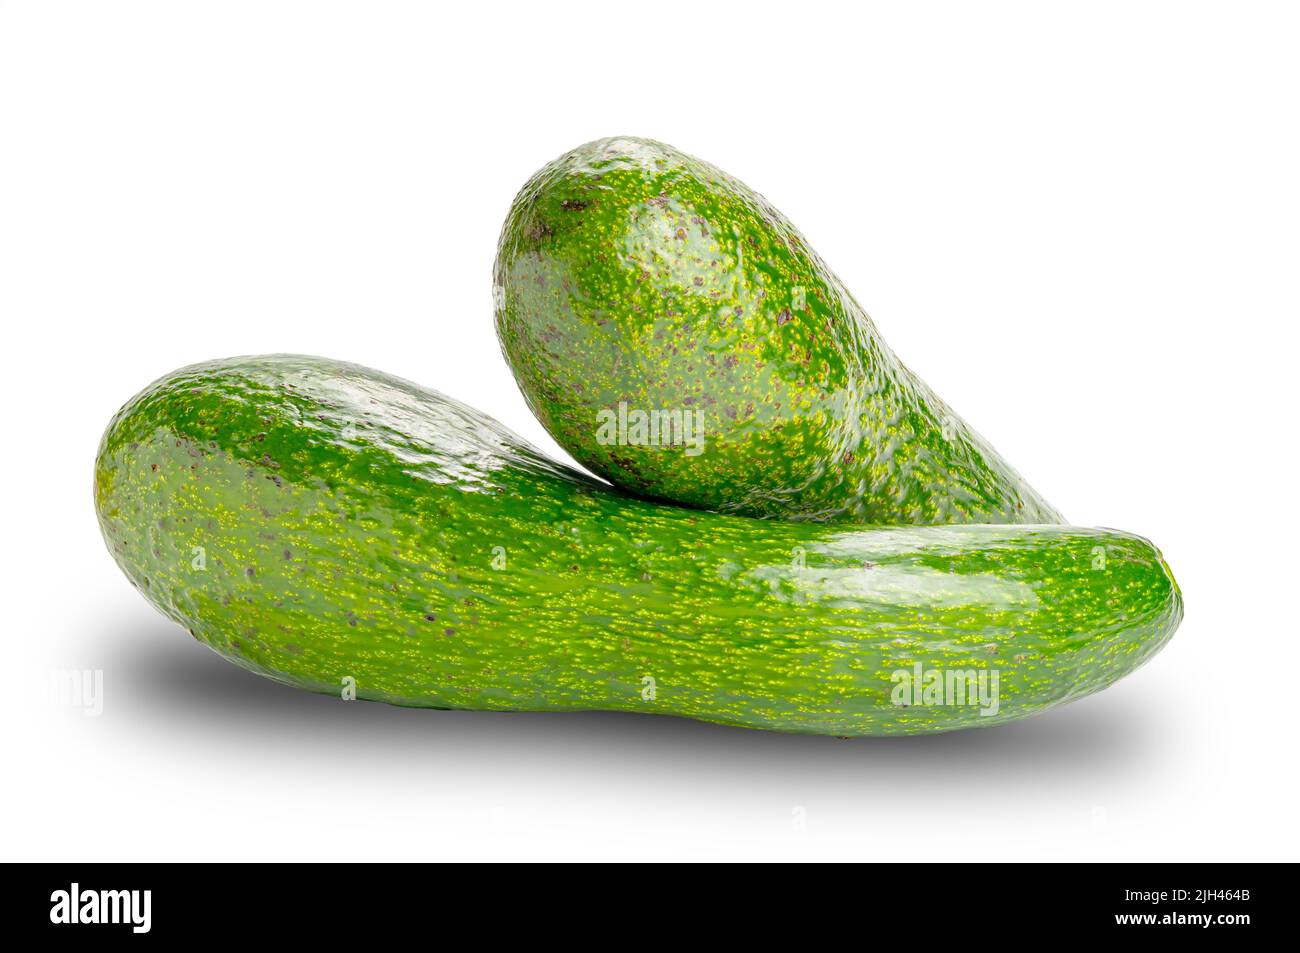 Fresh green avocado isolated on white background with clipping path. Avocado is a plant native to highland region. Stock Photo